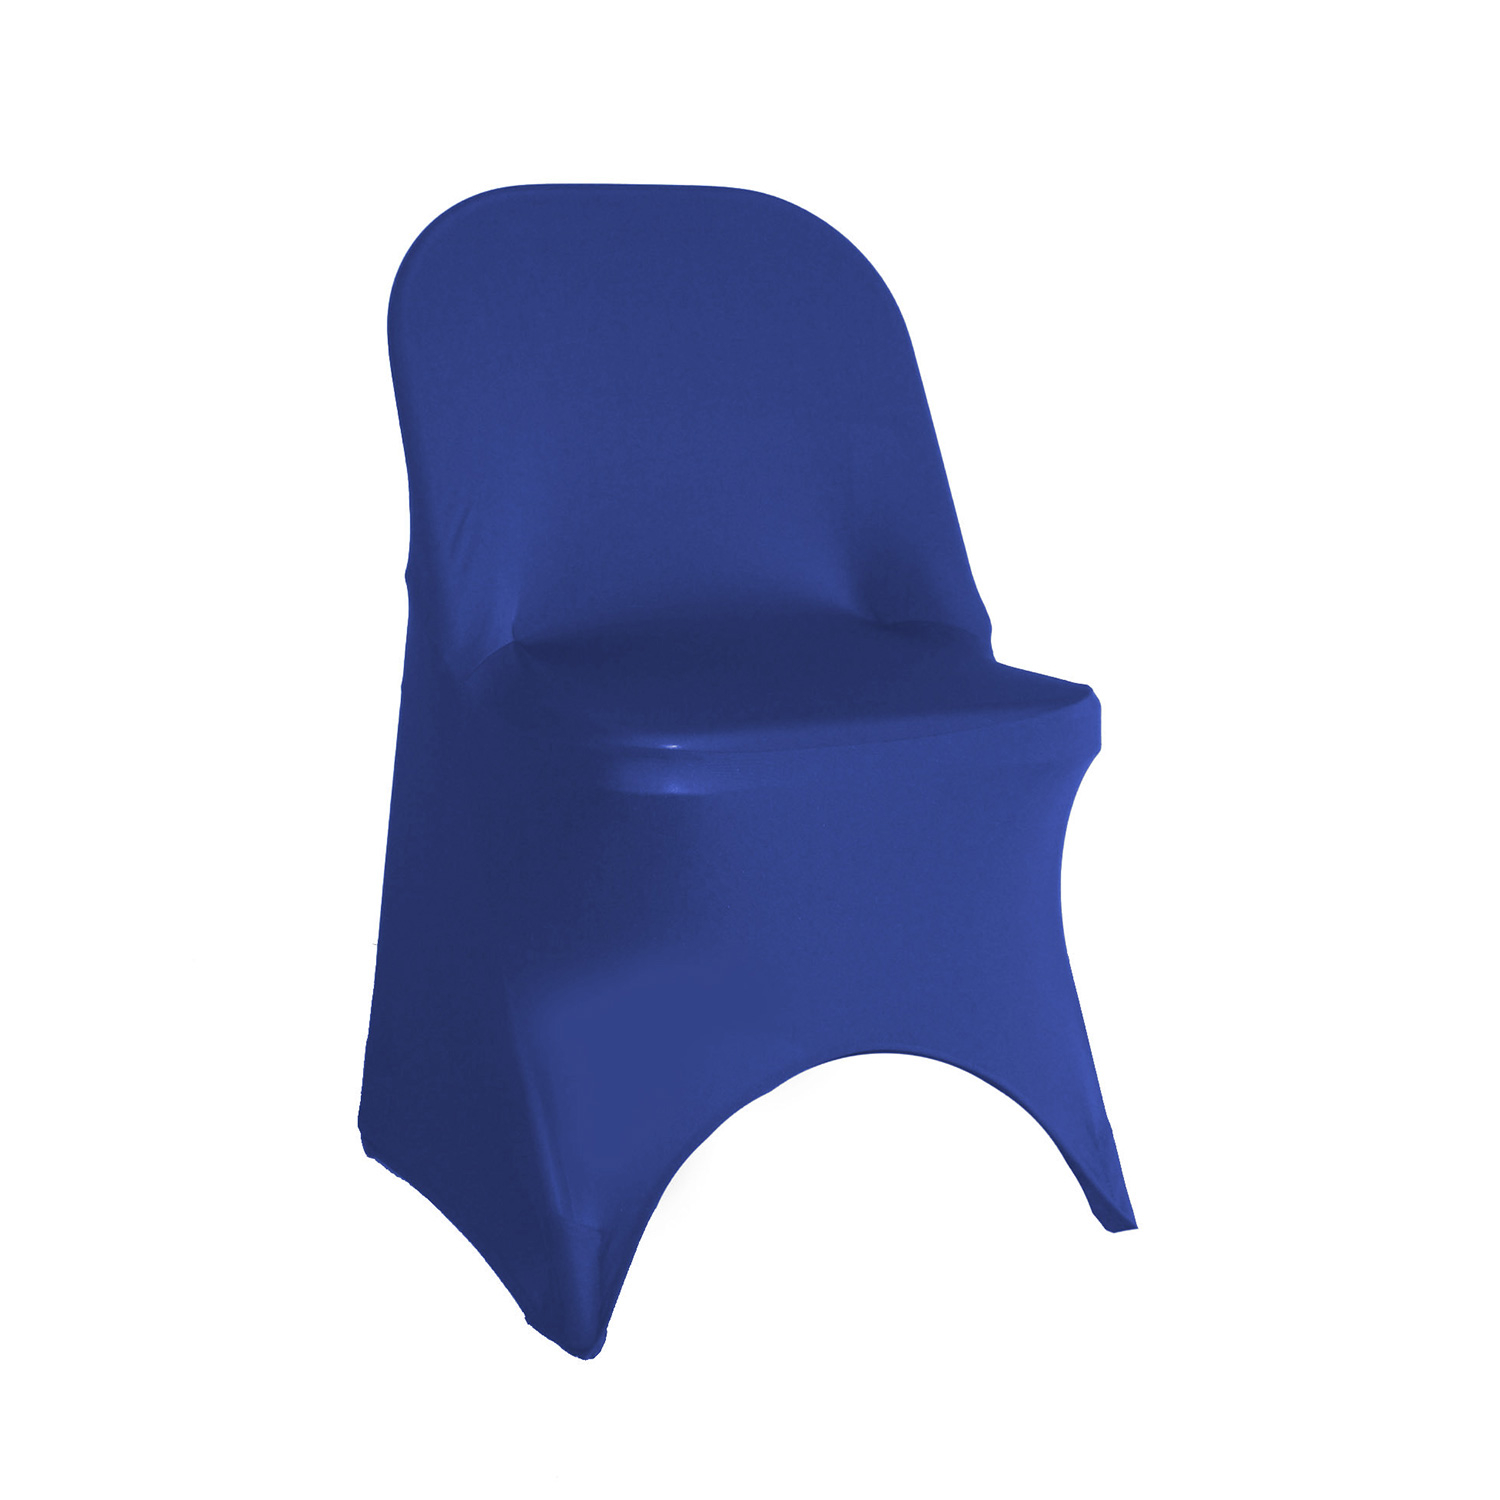 Your Chair Covers - Spandex Folding Chair Cover Royal Blue for Wedding, Party, Birthday, Patio, etc. - image 1 of 3